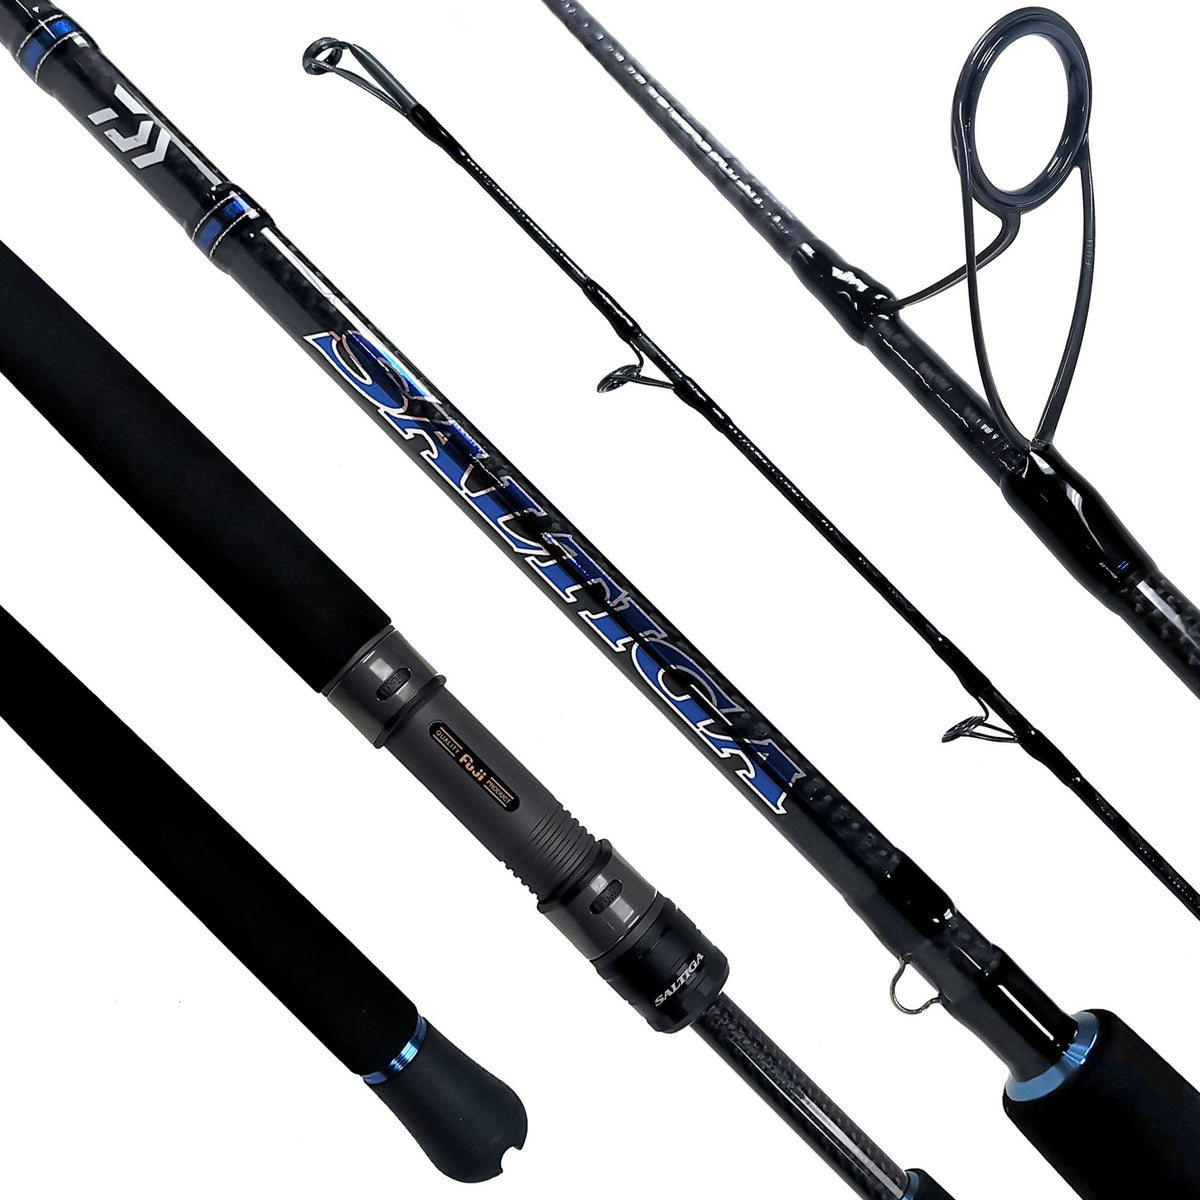 Fishing Rod Team Daiwa Strong Float - Nootica - Water addicts, like you!